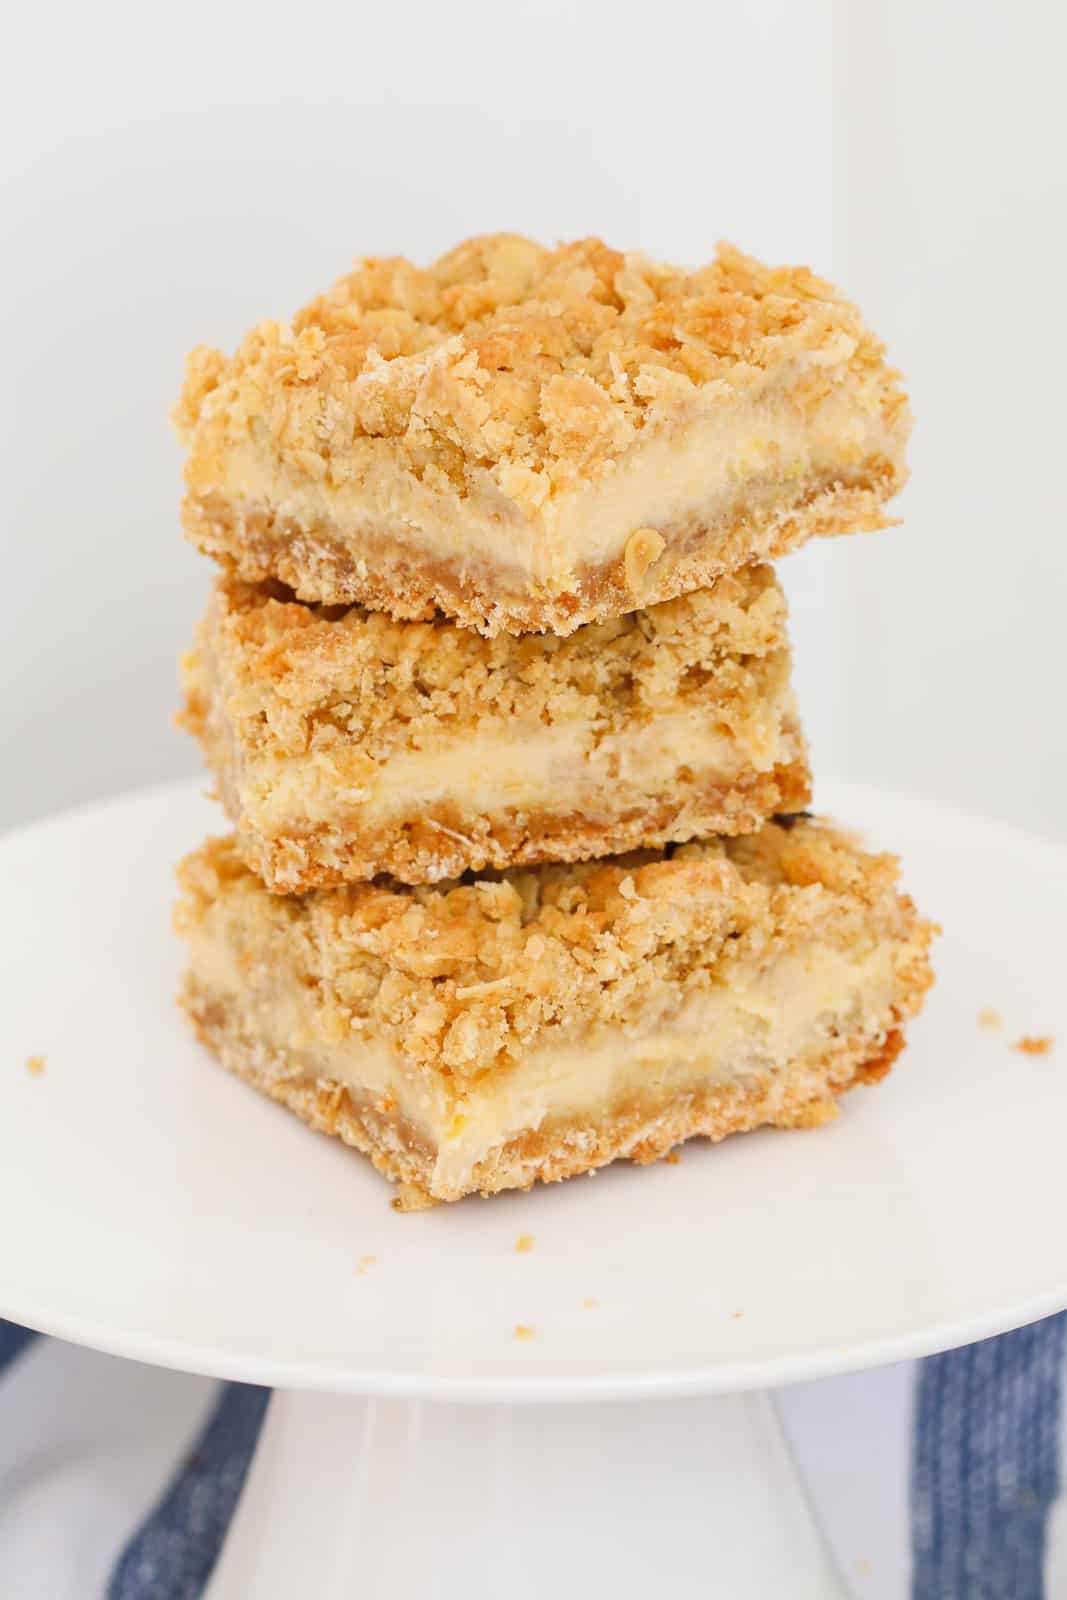 Creamy Lemon Crumble Bars stacked on a plate